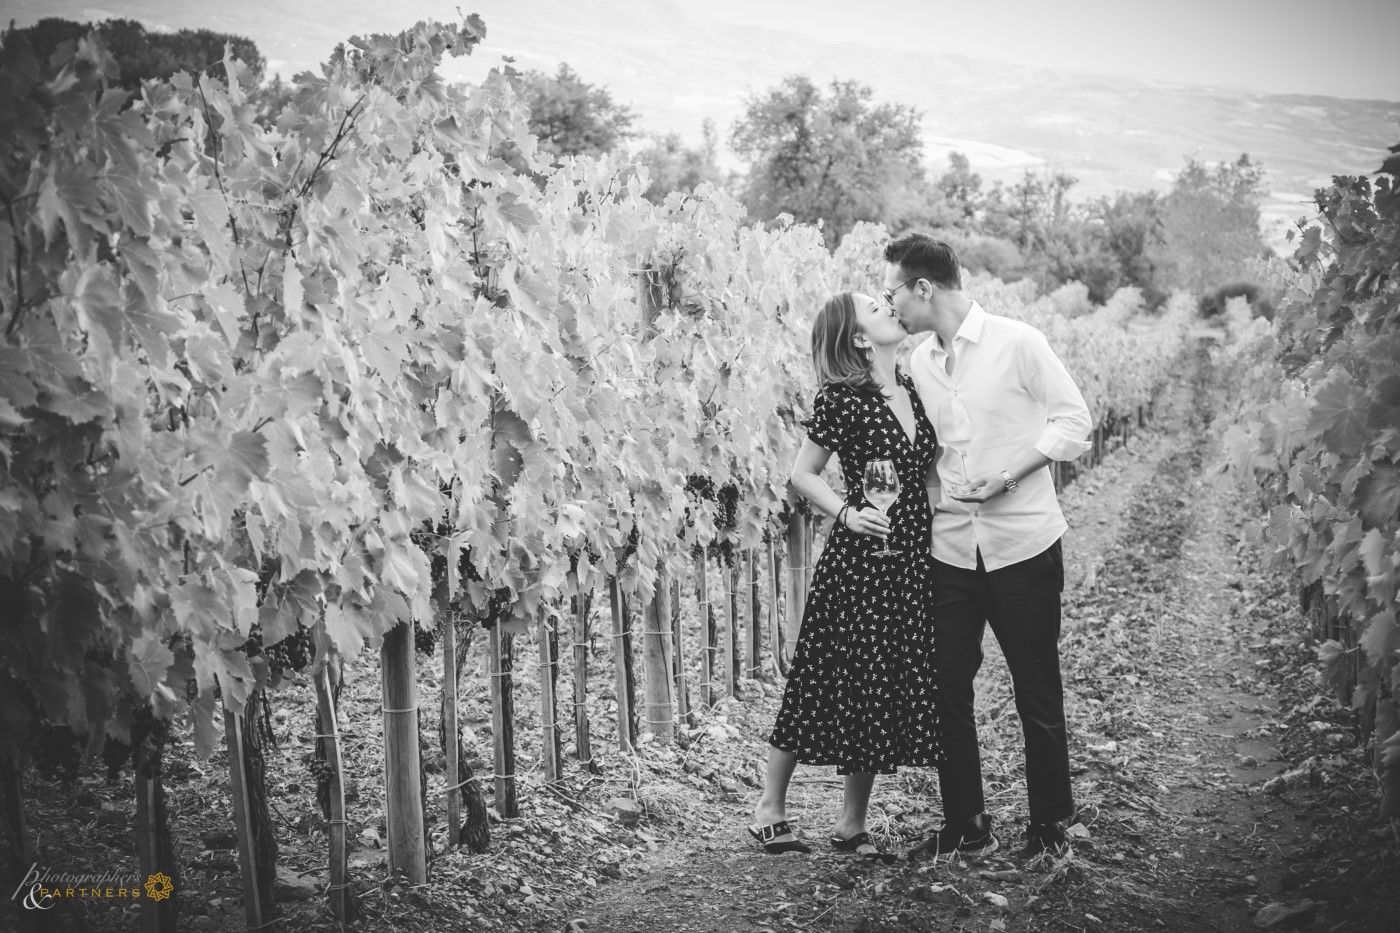 A kiss in the vineyard 